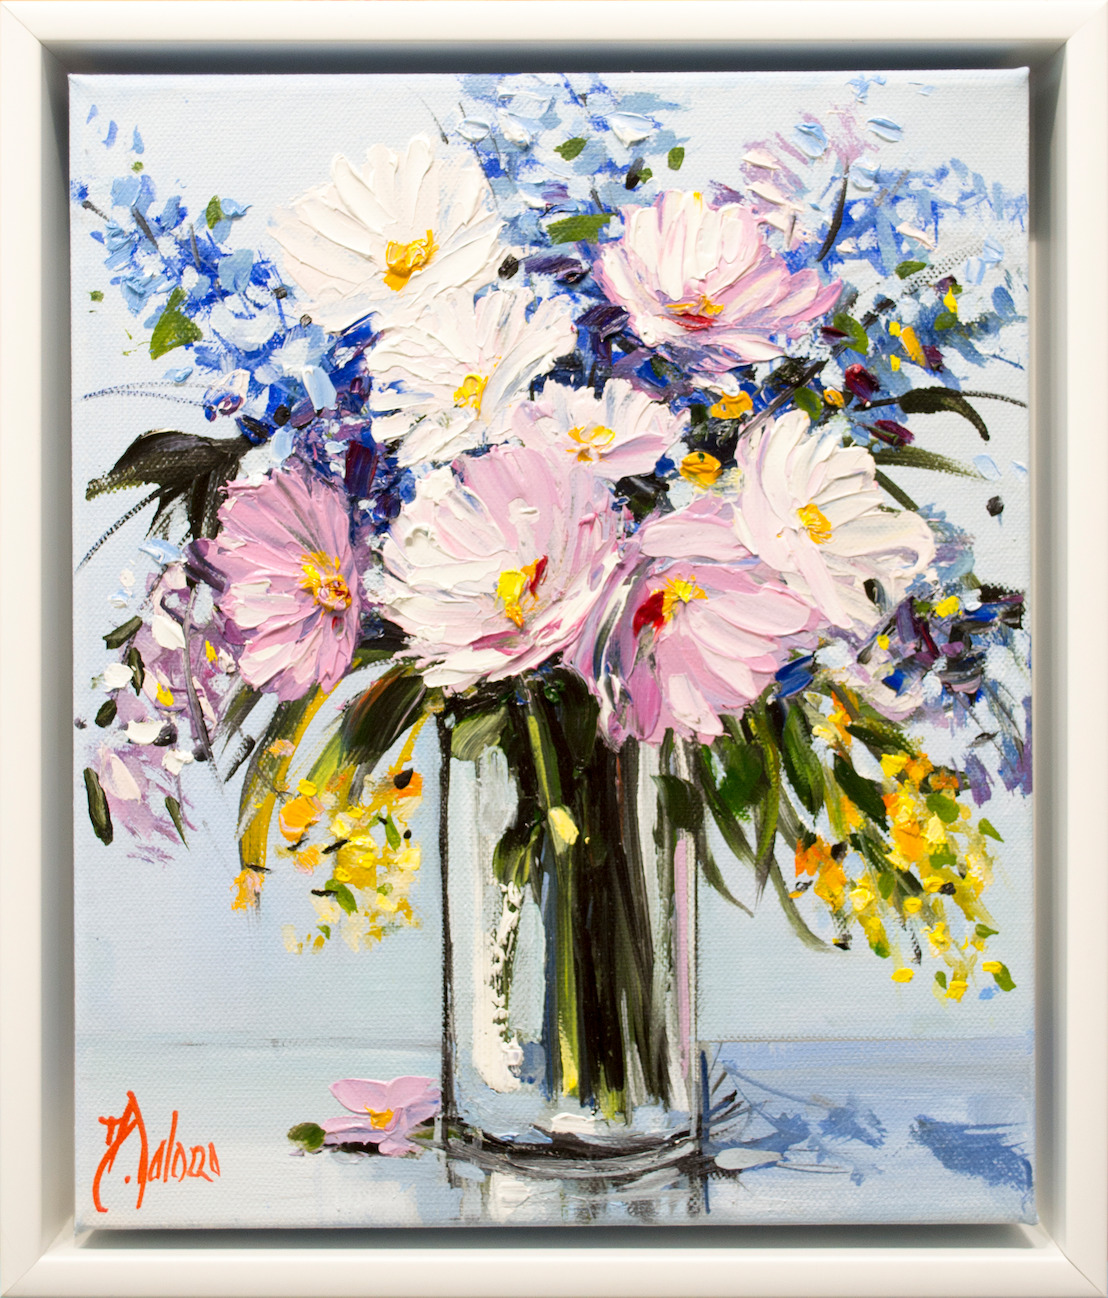 Framed Front View Of Still Life Painting "Morning Blues" By Judith Dalozzo